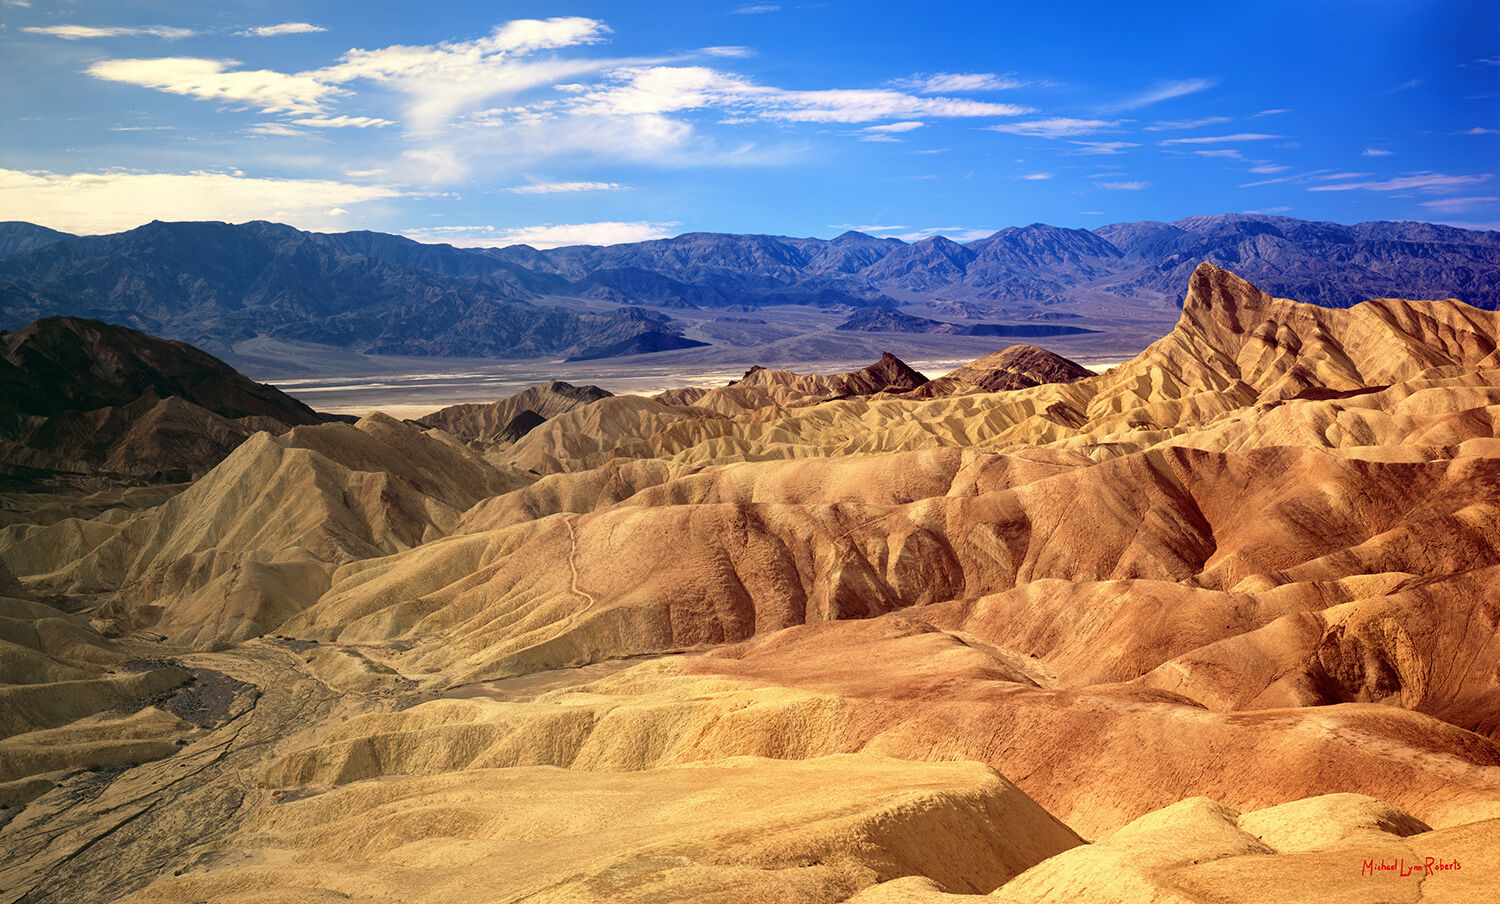 This view of Death Valley from the high overlook of Zabriskie Point is a classic scenic view of the American West. The colorful...